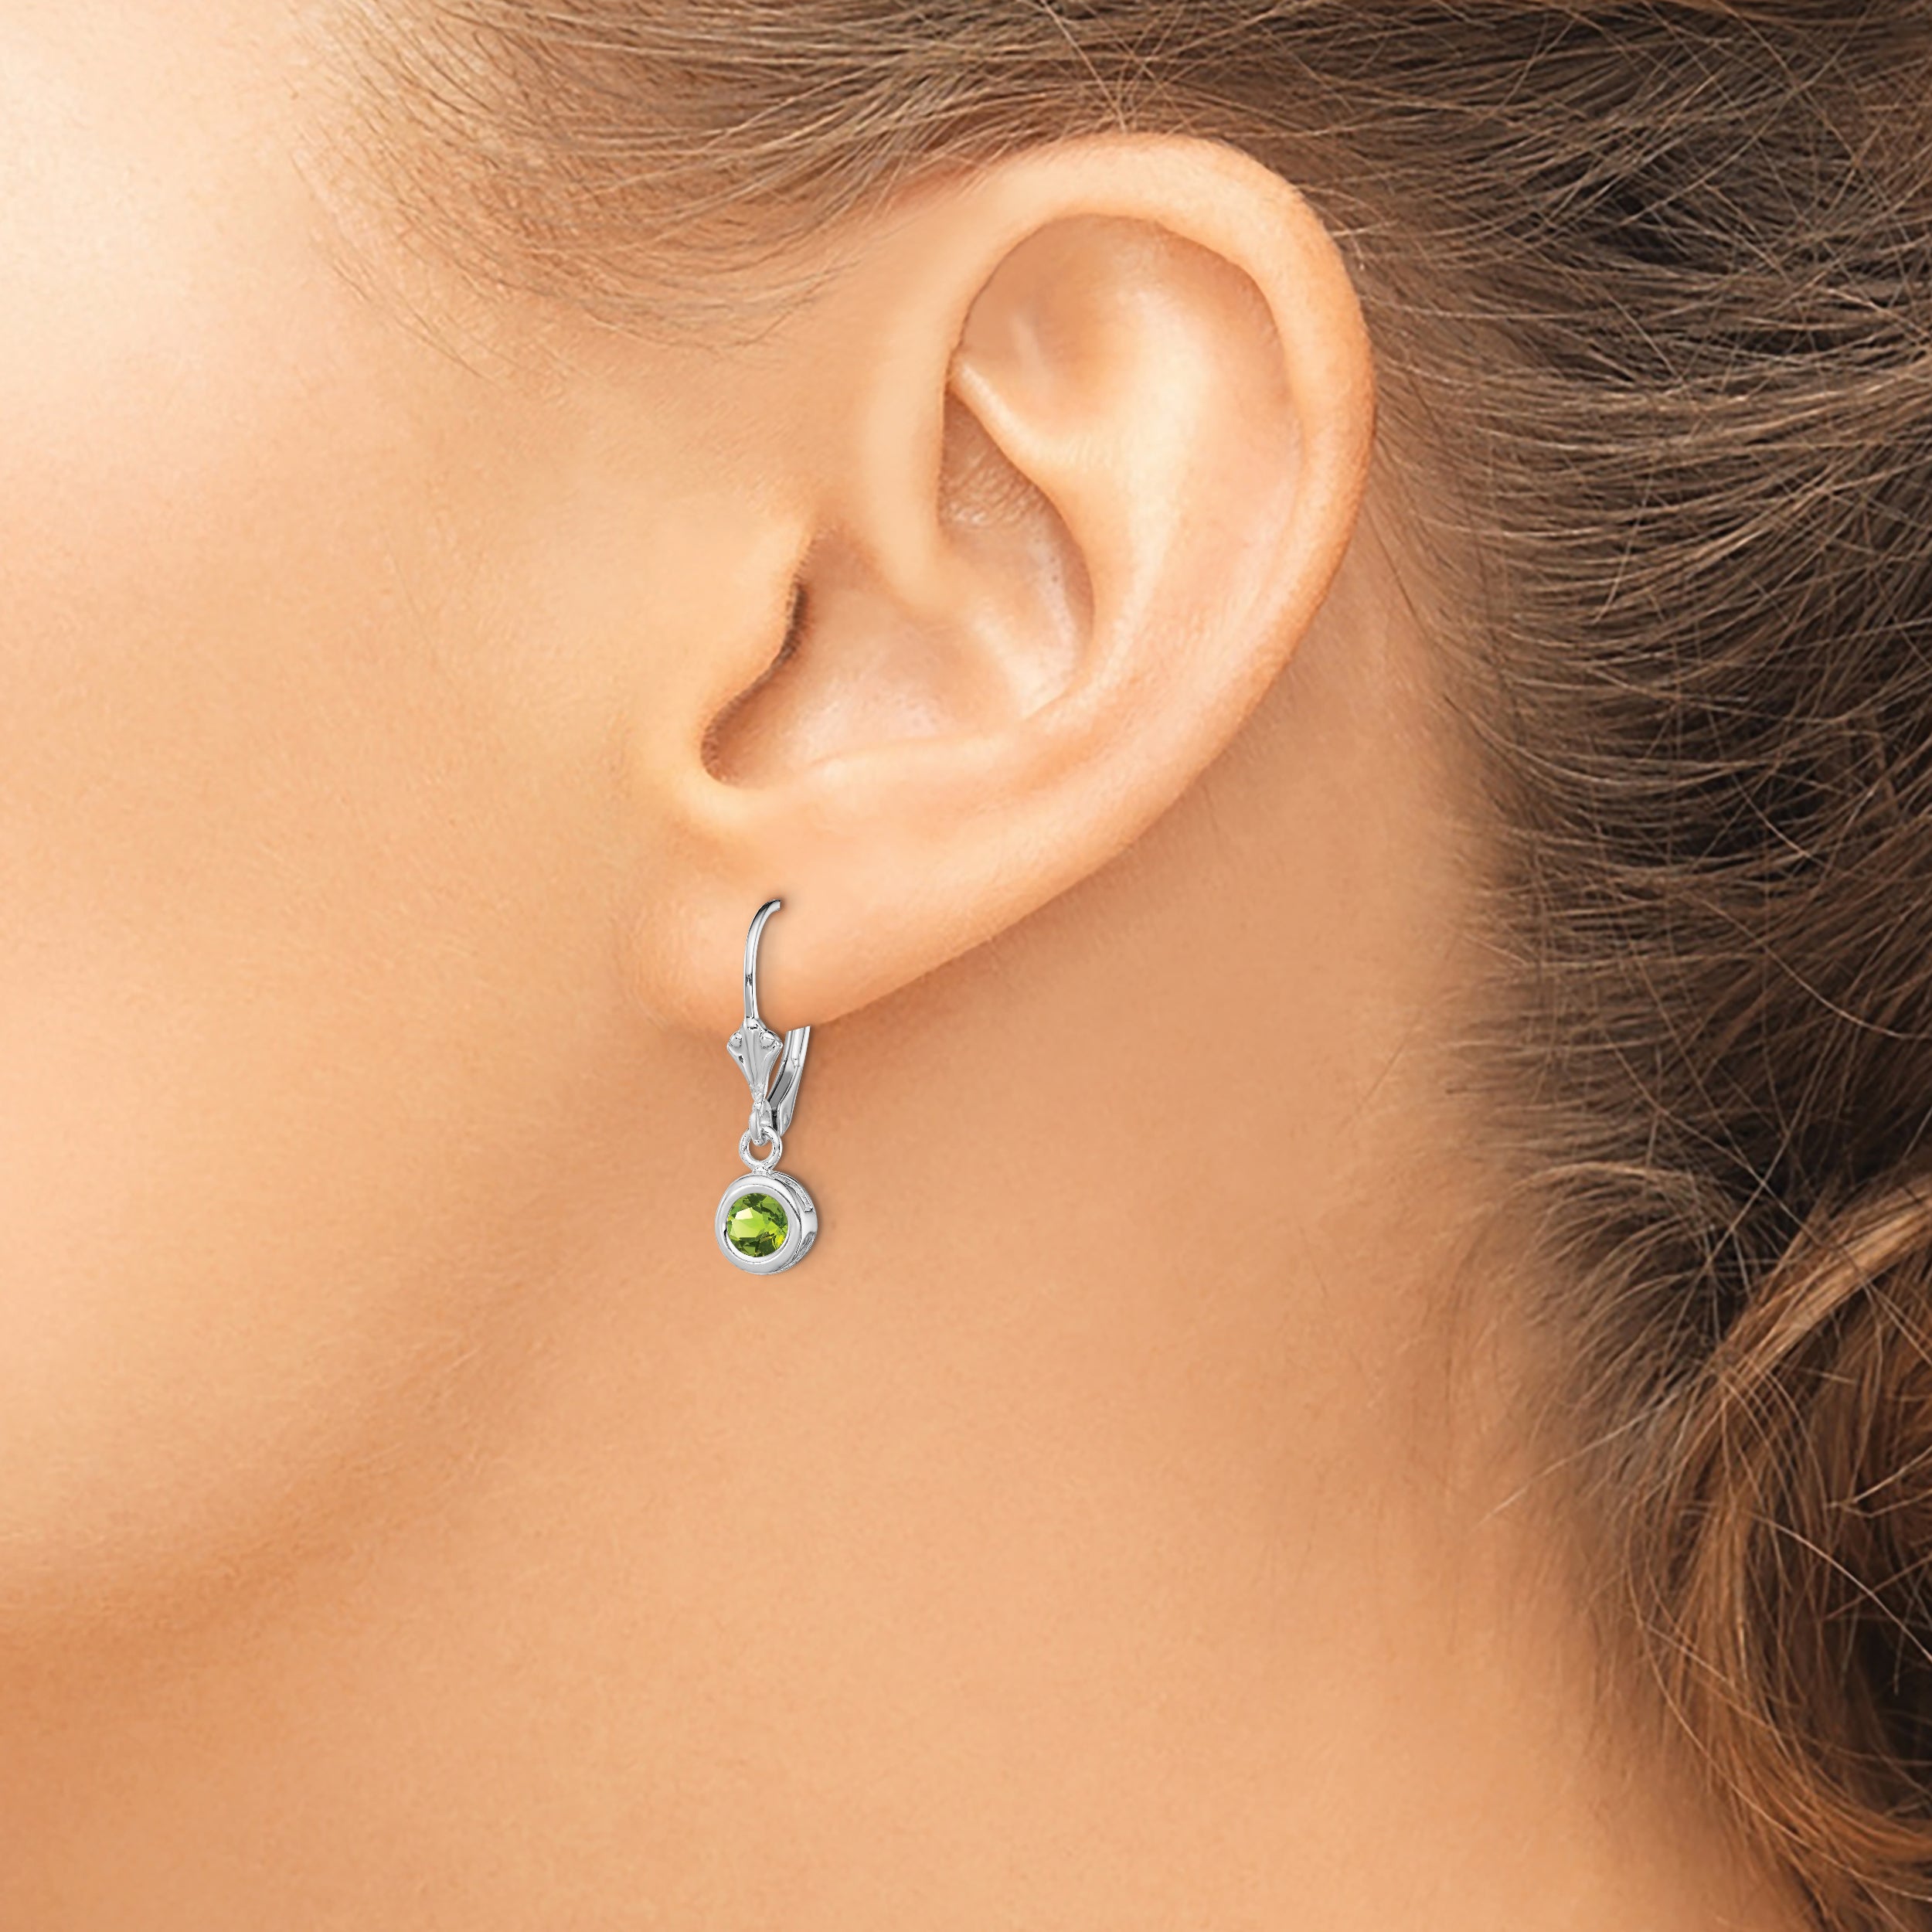 Sterling Silver Rhodium Plated 5mm Round Peridot Leverback Earrings